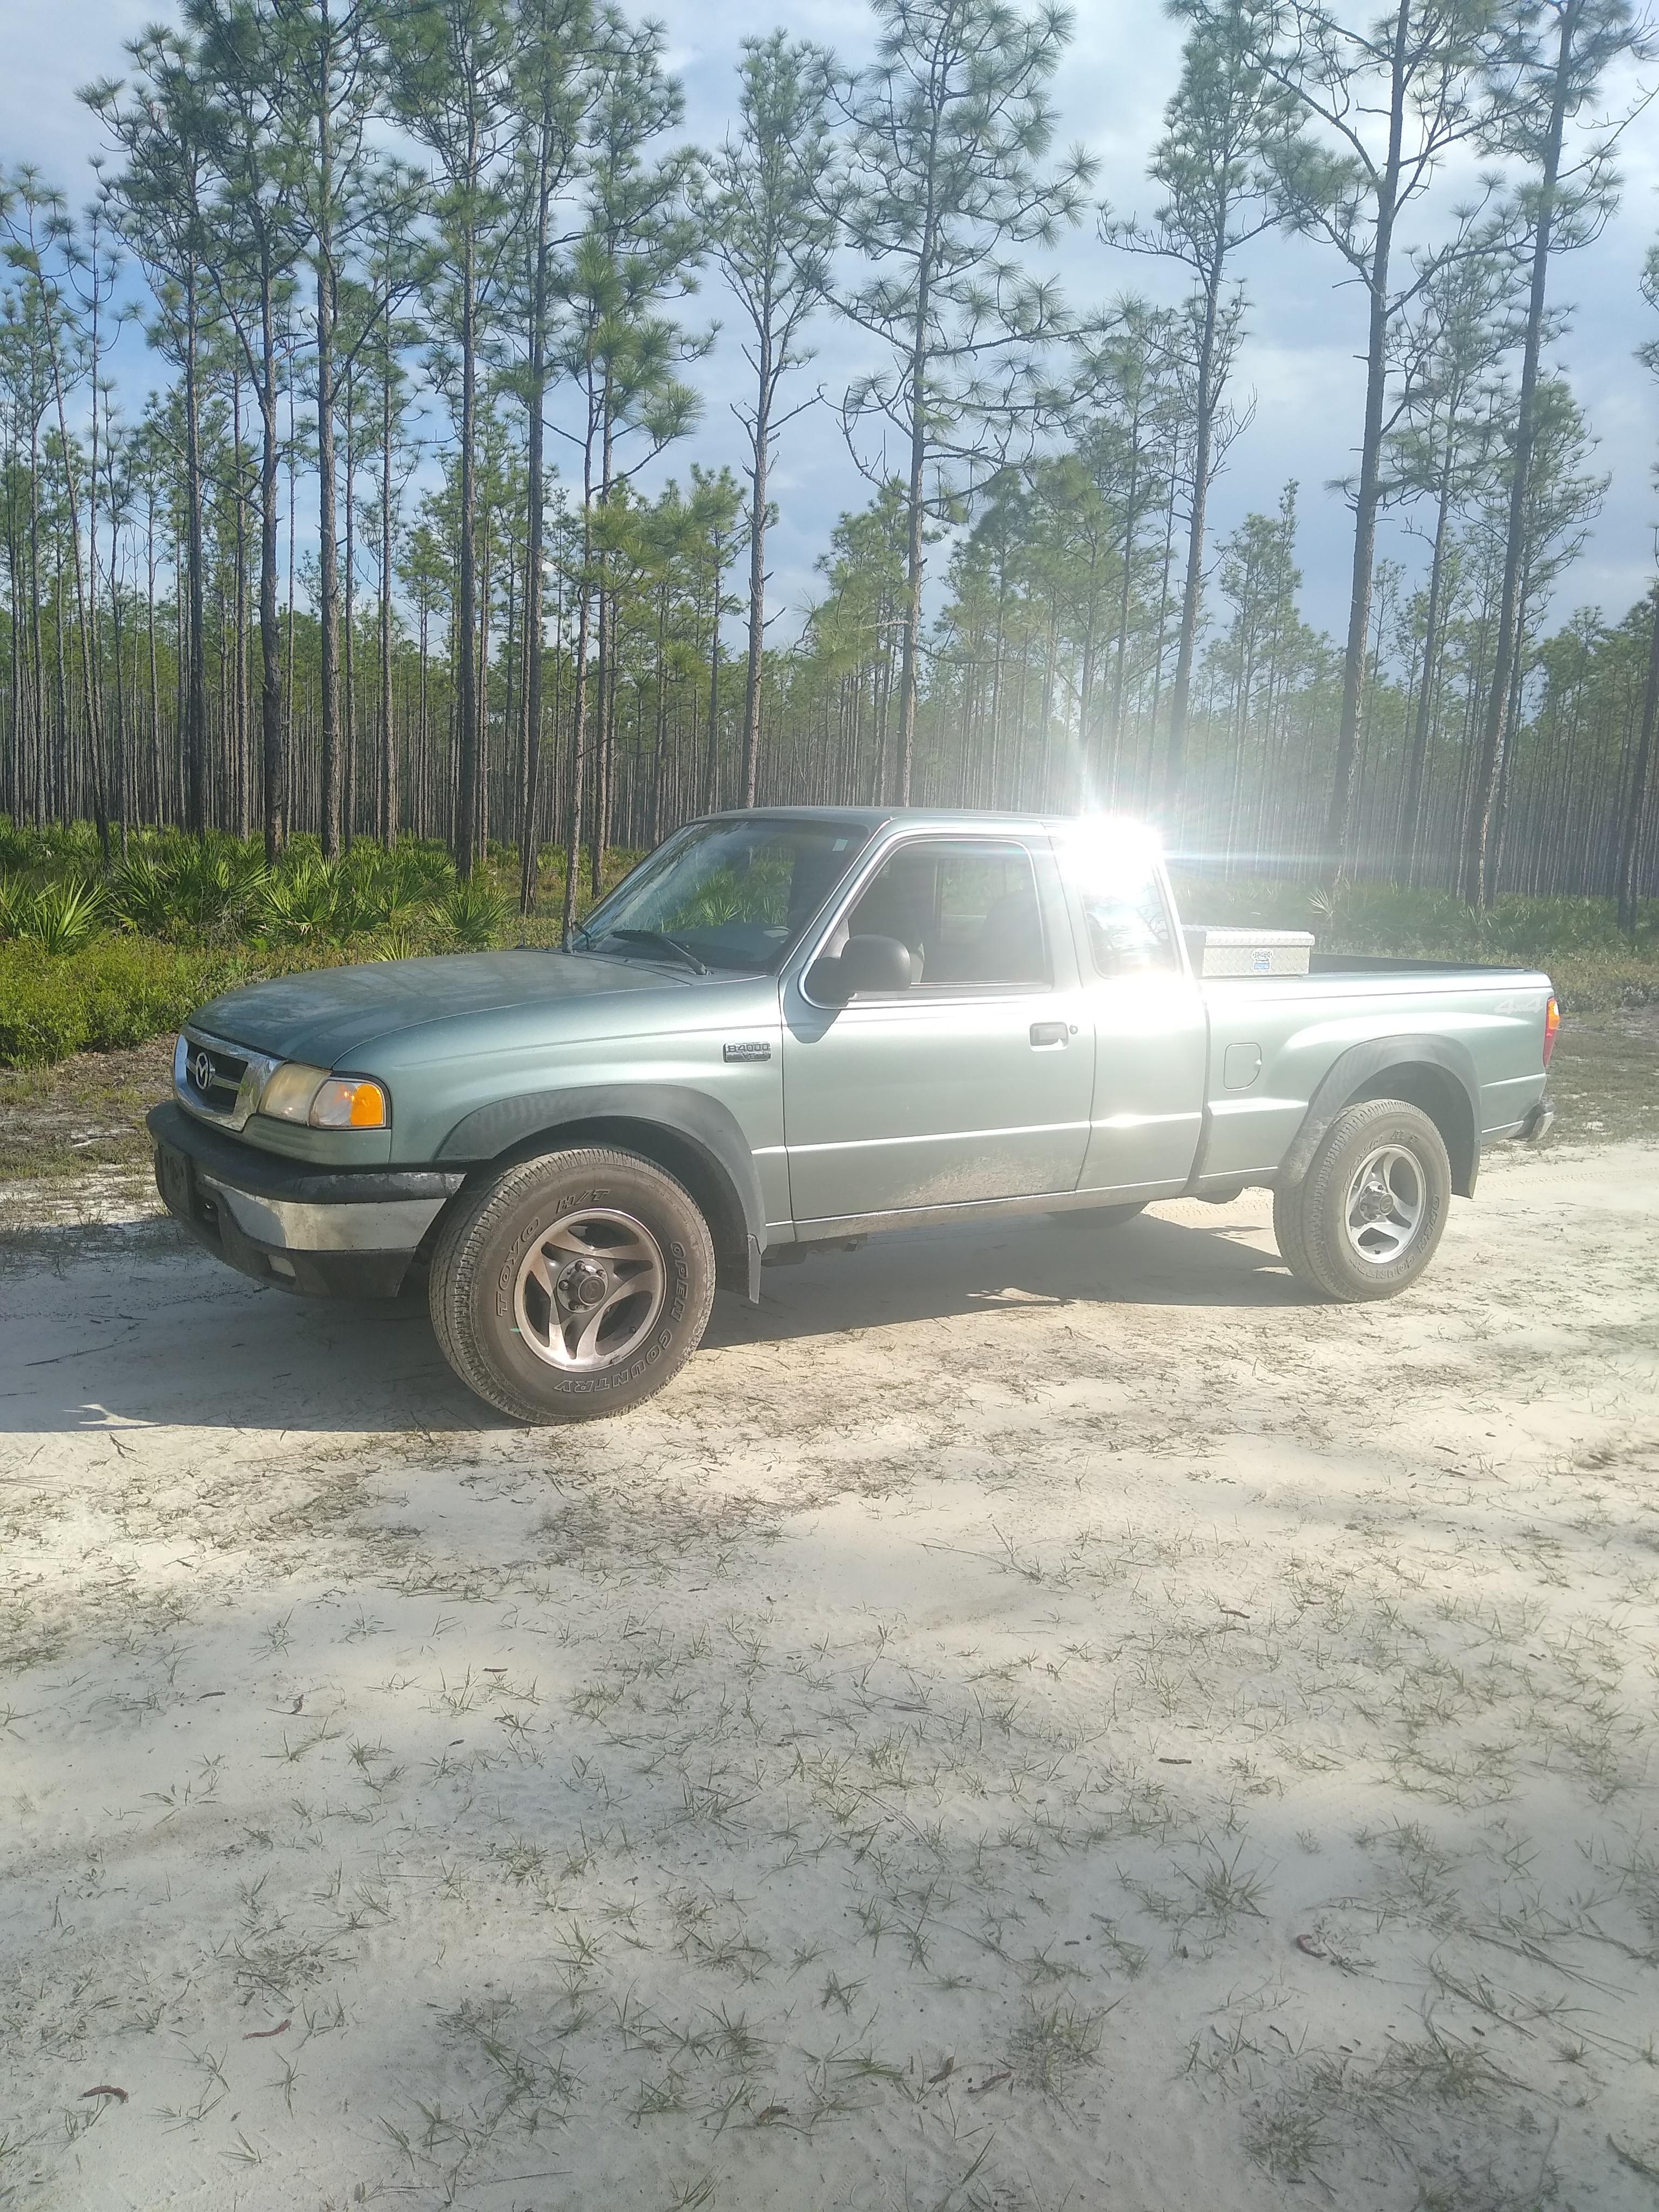 This is my 2003 Mazda b4000 4 wheel drive I'm thinking about putting a 4-in  lift and slightly bigger tires : r/fordranger